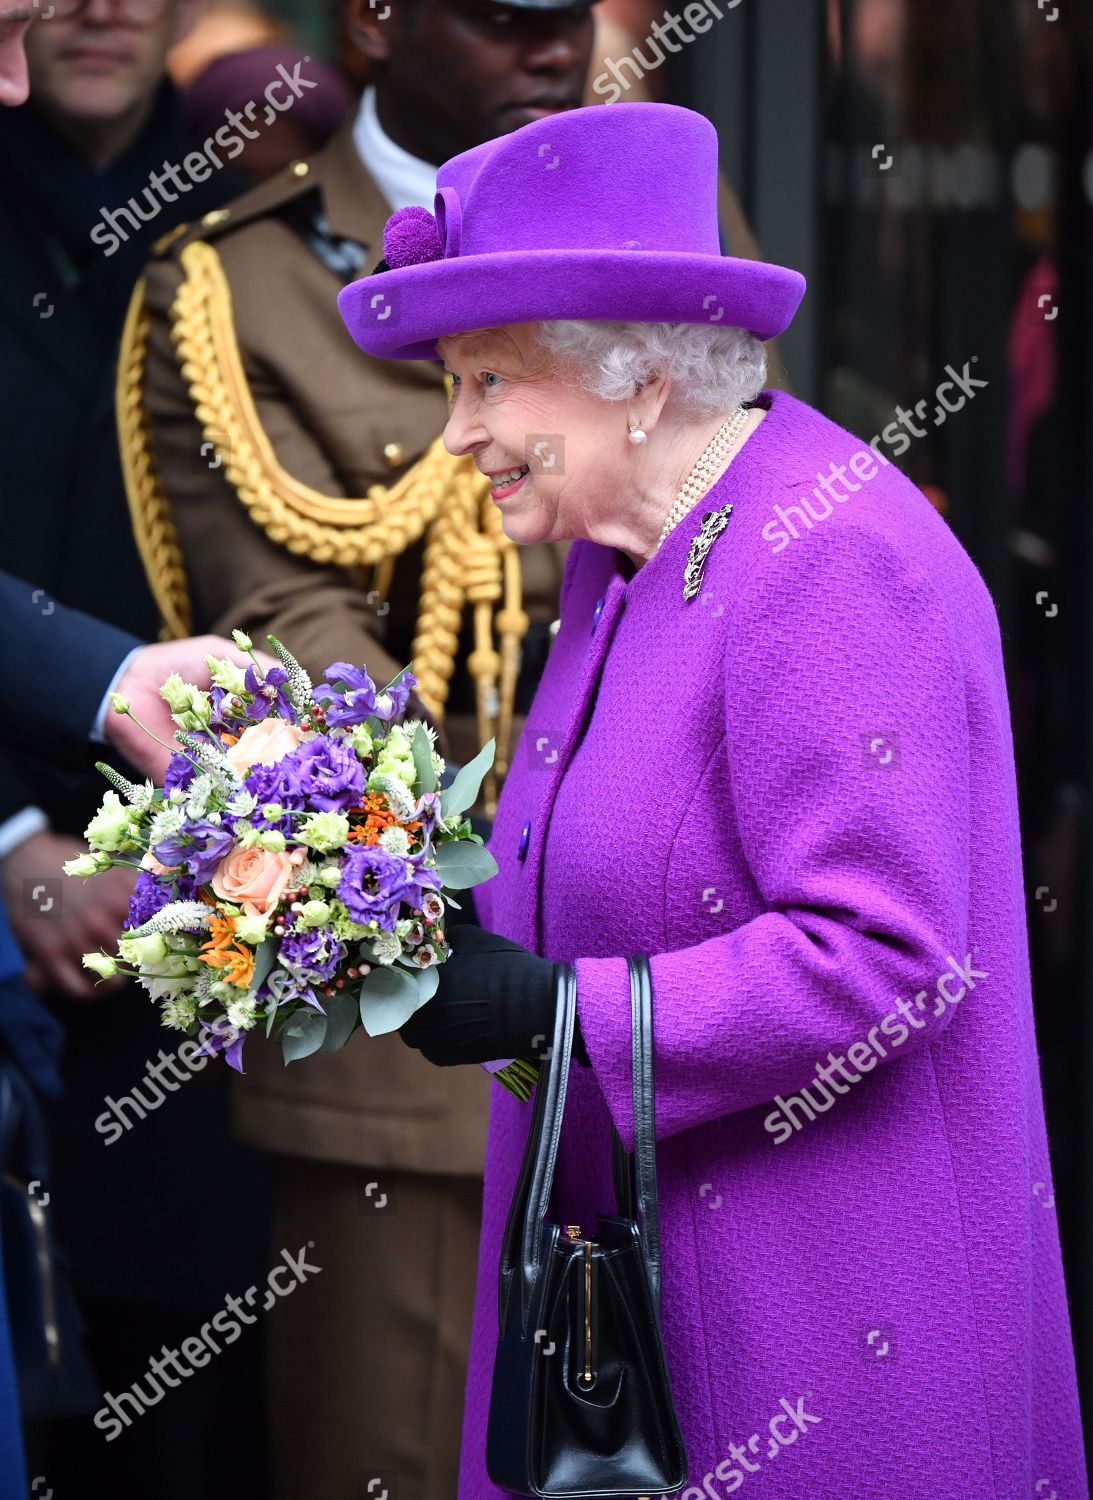 CASA REAL BRITÁNICA - Página 28 Queen-elizabeth-ii-opens-the-royal-national-ent-and-eastman-hospitals-london-uk-shutterstock-editorial-10561089u